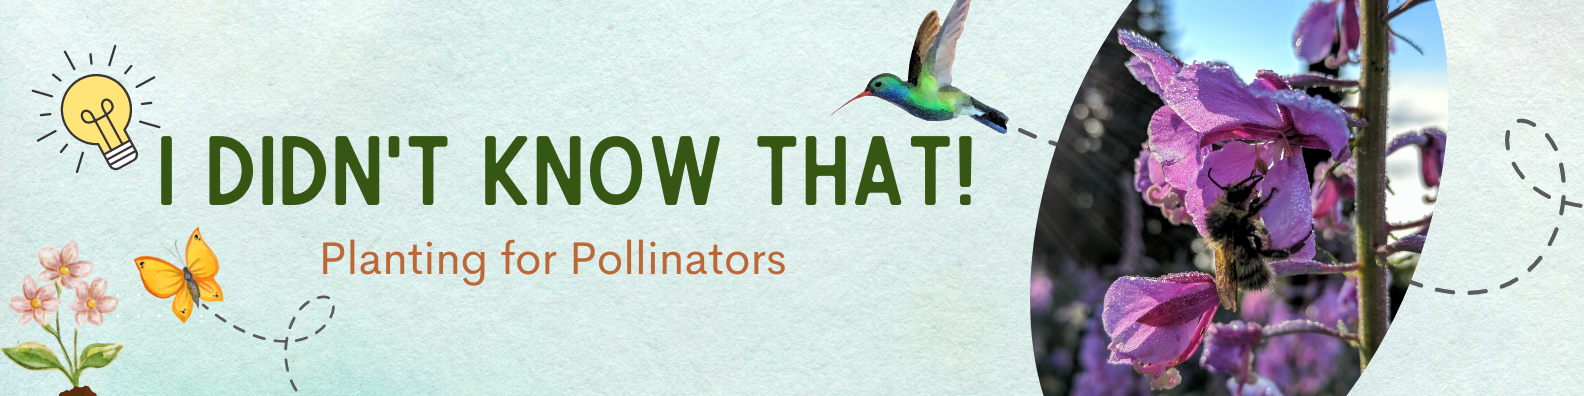 title banner with photo of bee on flower and text "I Didn't Know That! Planting for Pollinators"